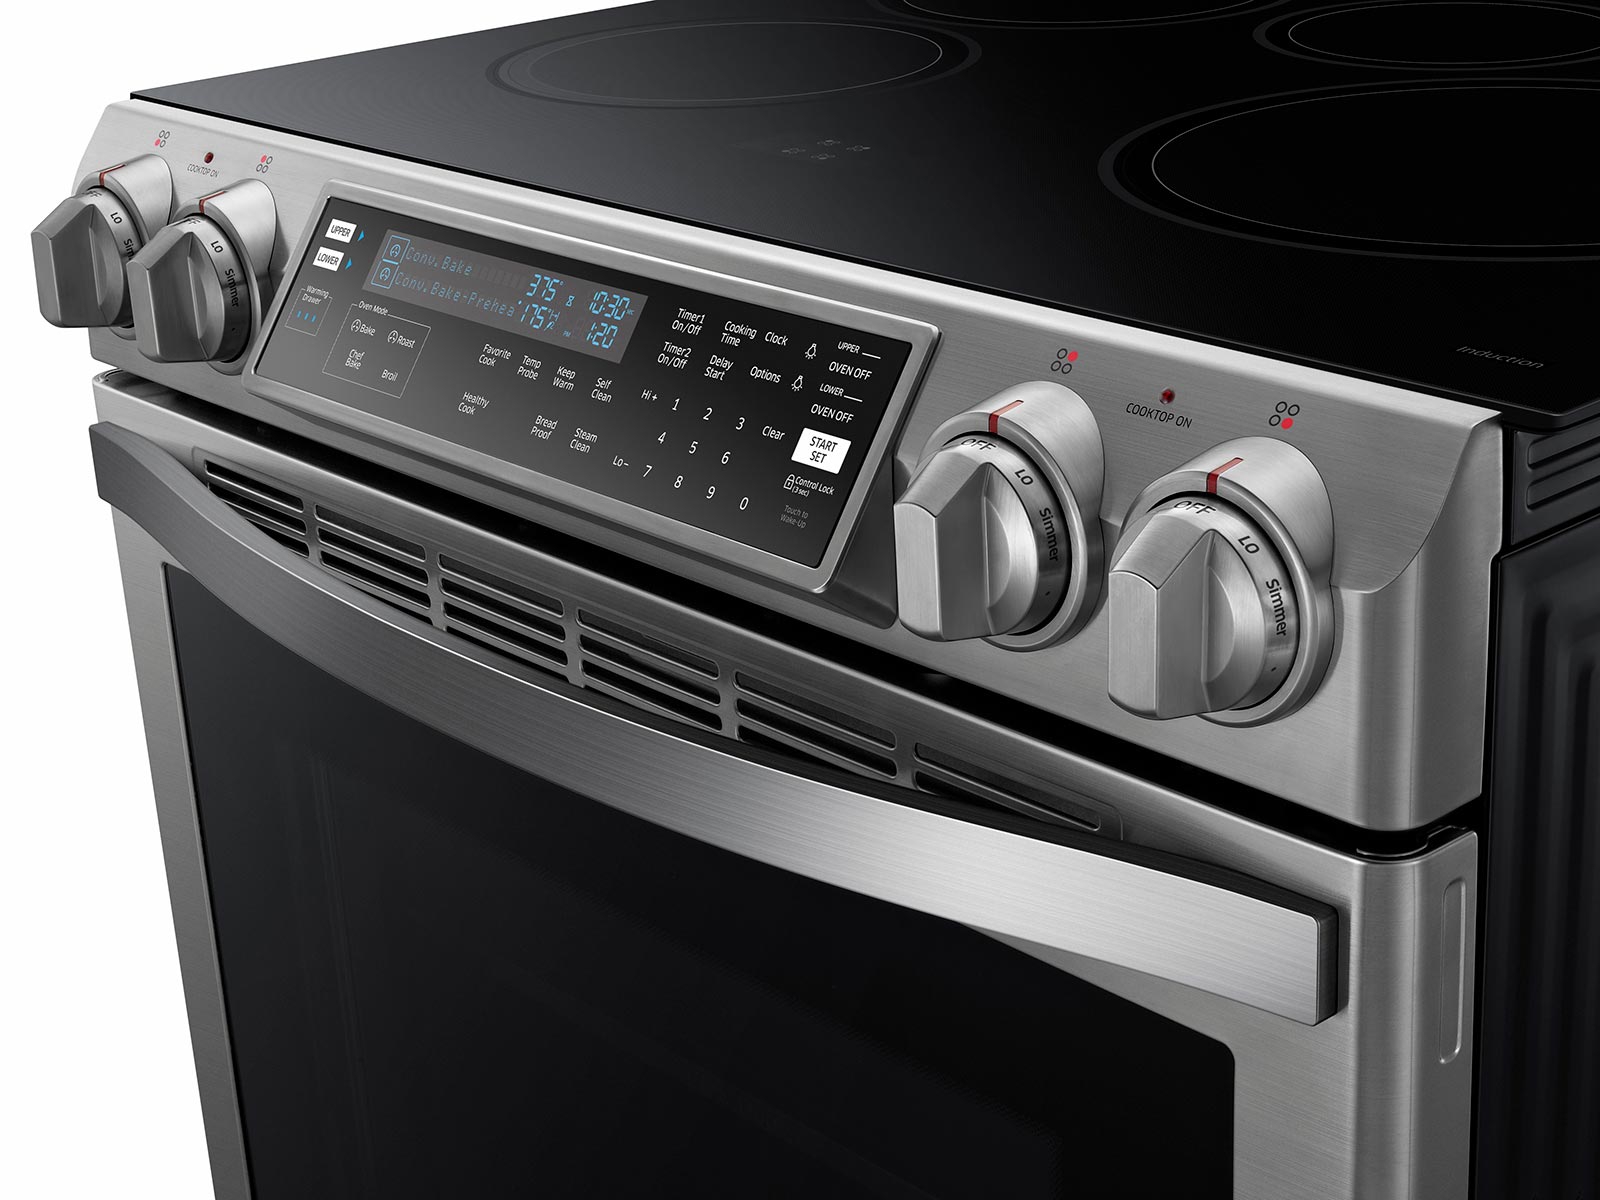 5.8 cu. ft. Slide-In Induction Chef Collection Range with Flex Duo™ Oven  Ranges - NE58H9970WS/AA